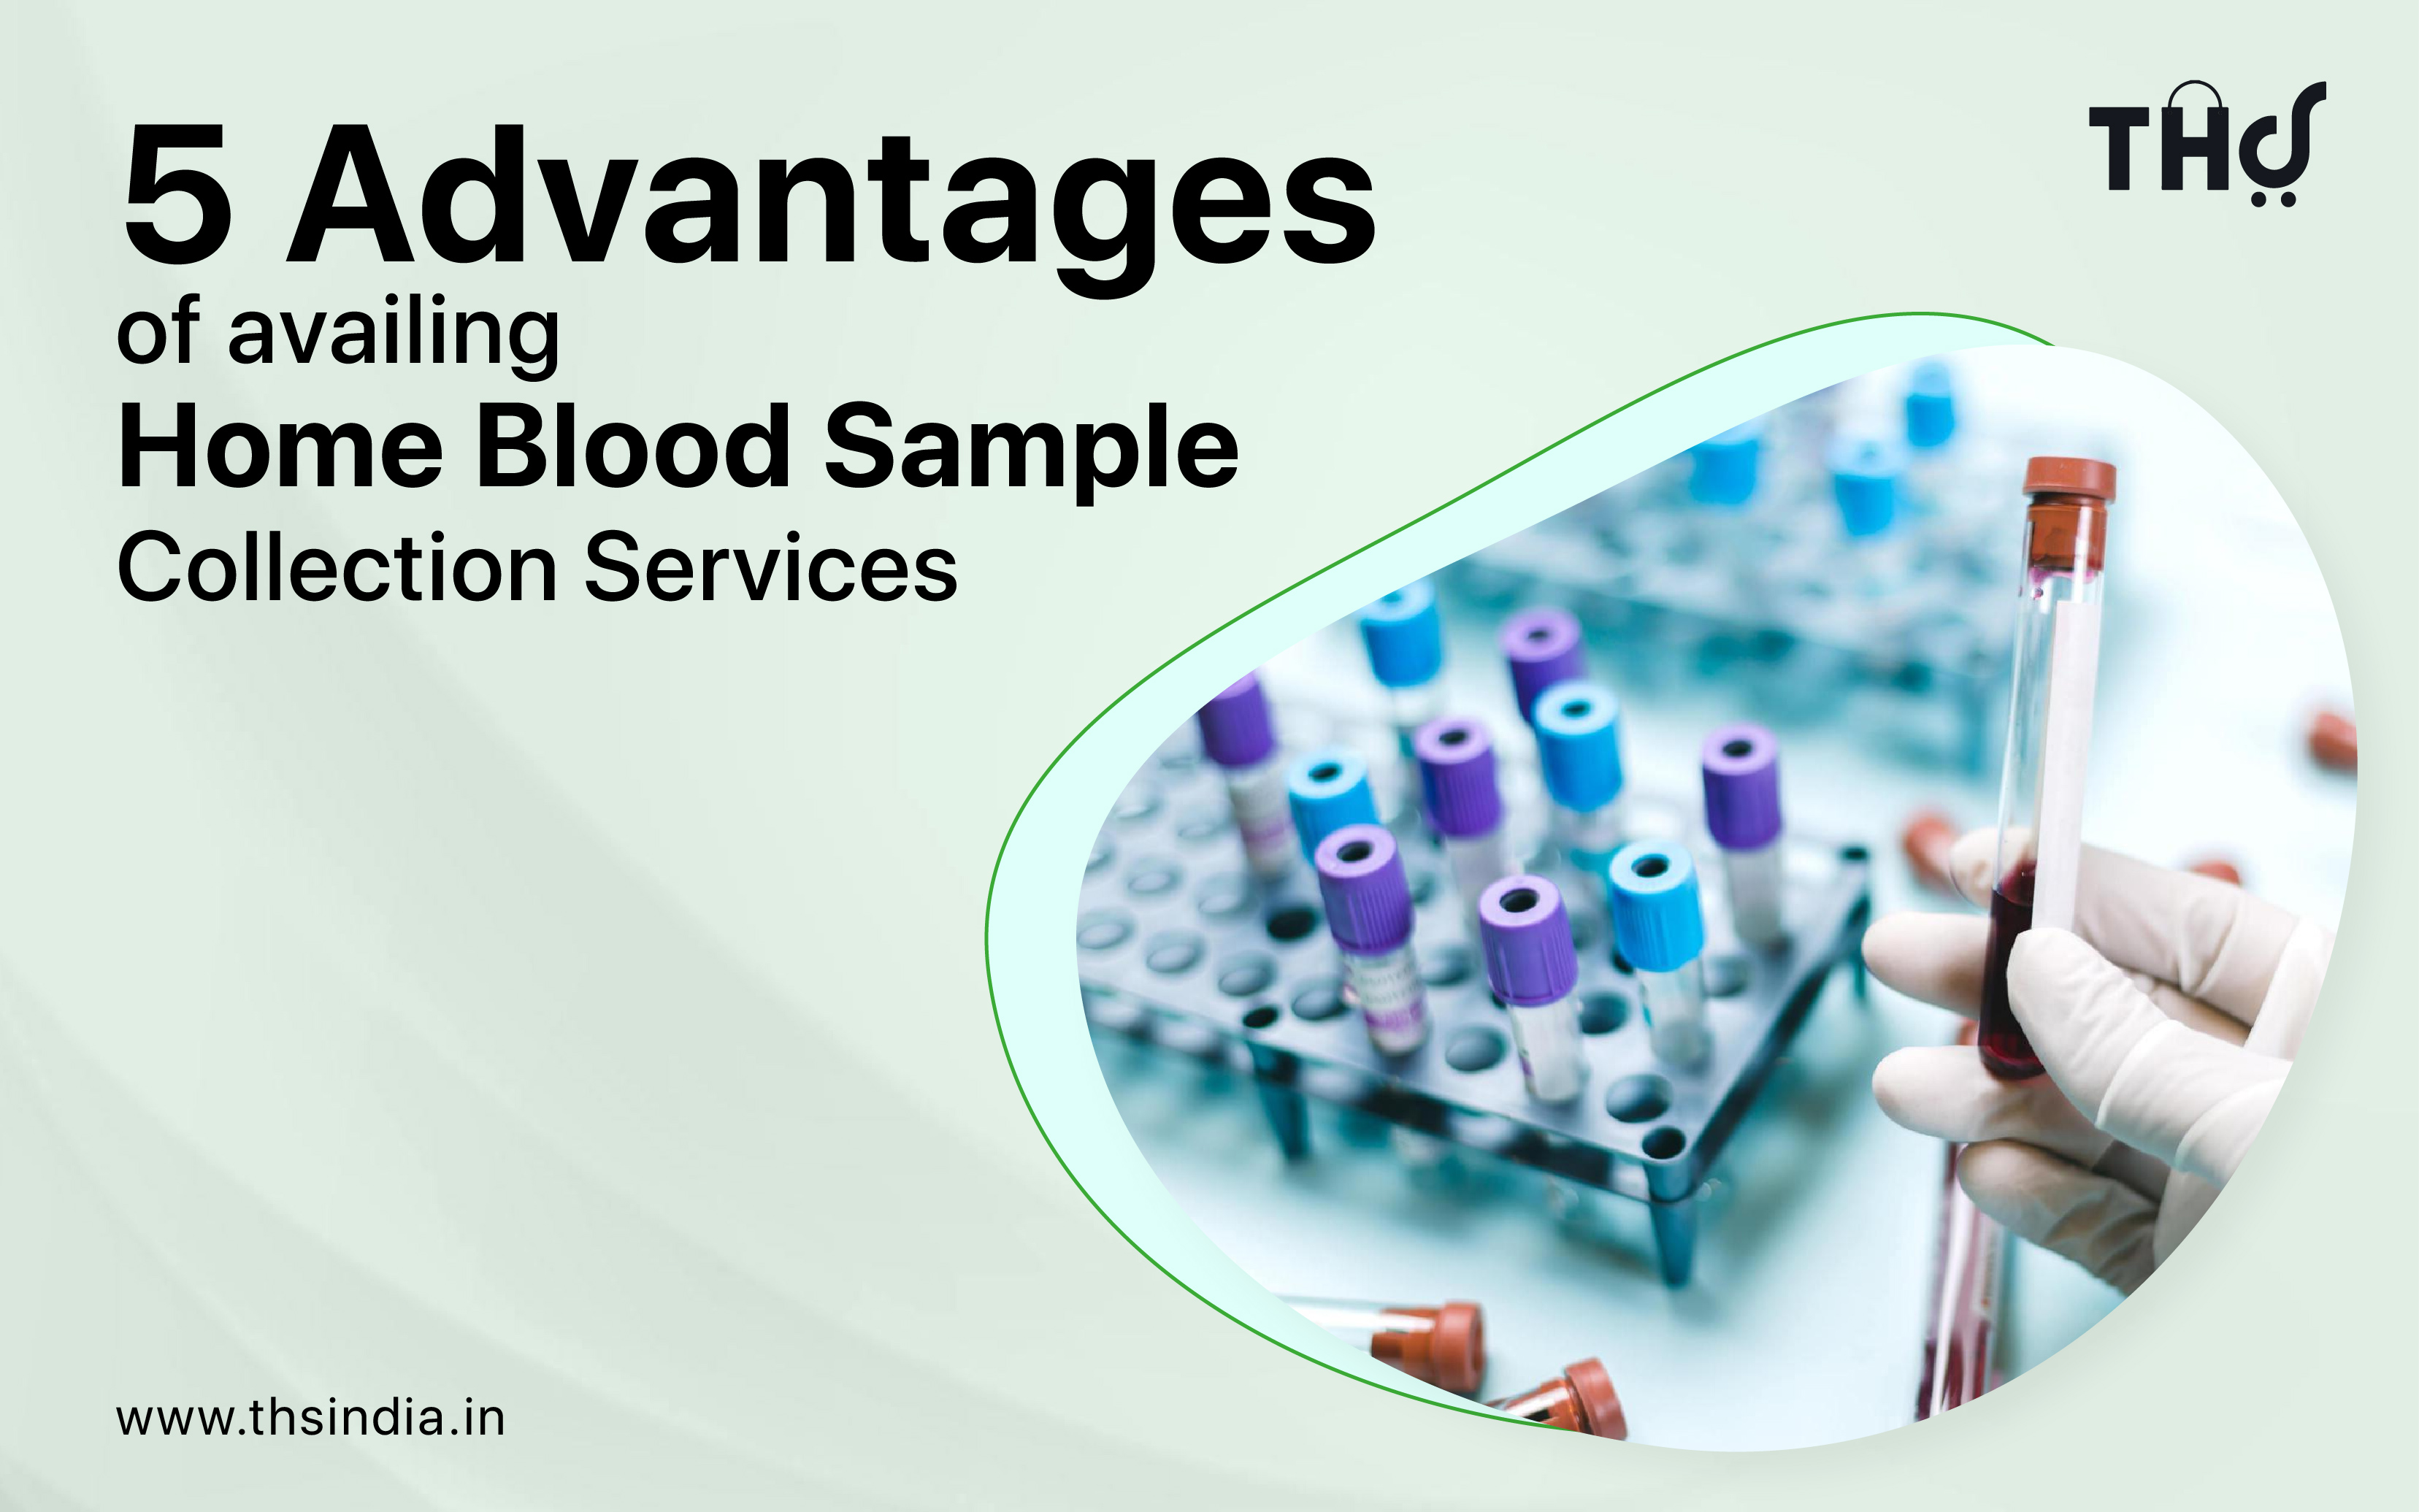 Home Blood Sample Collection